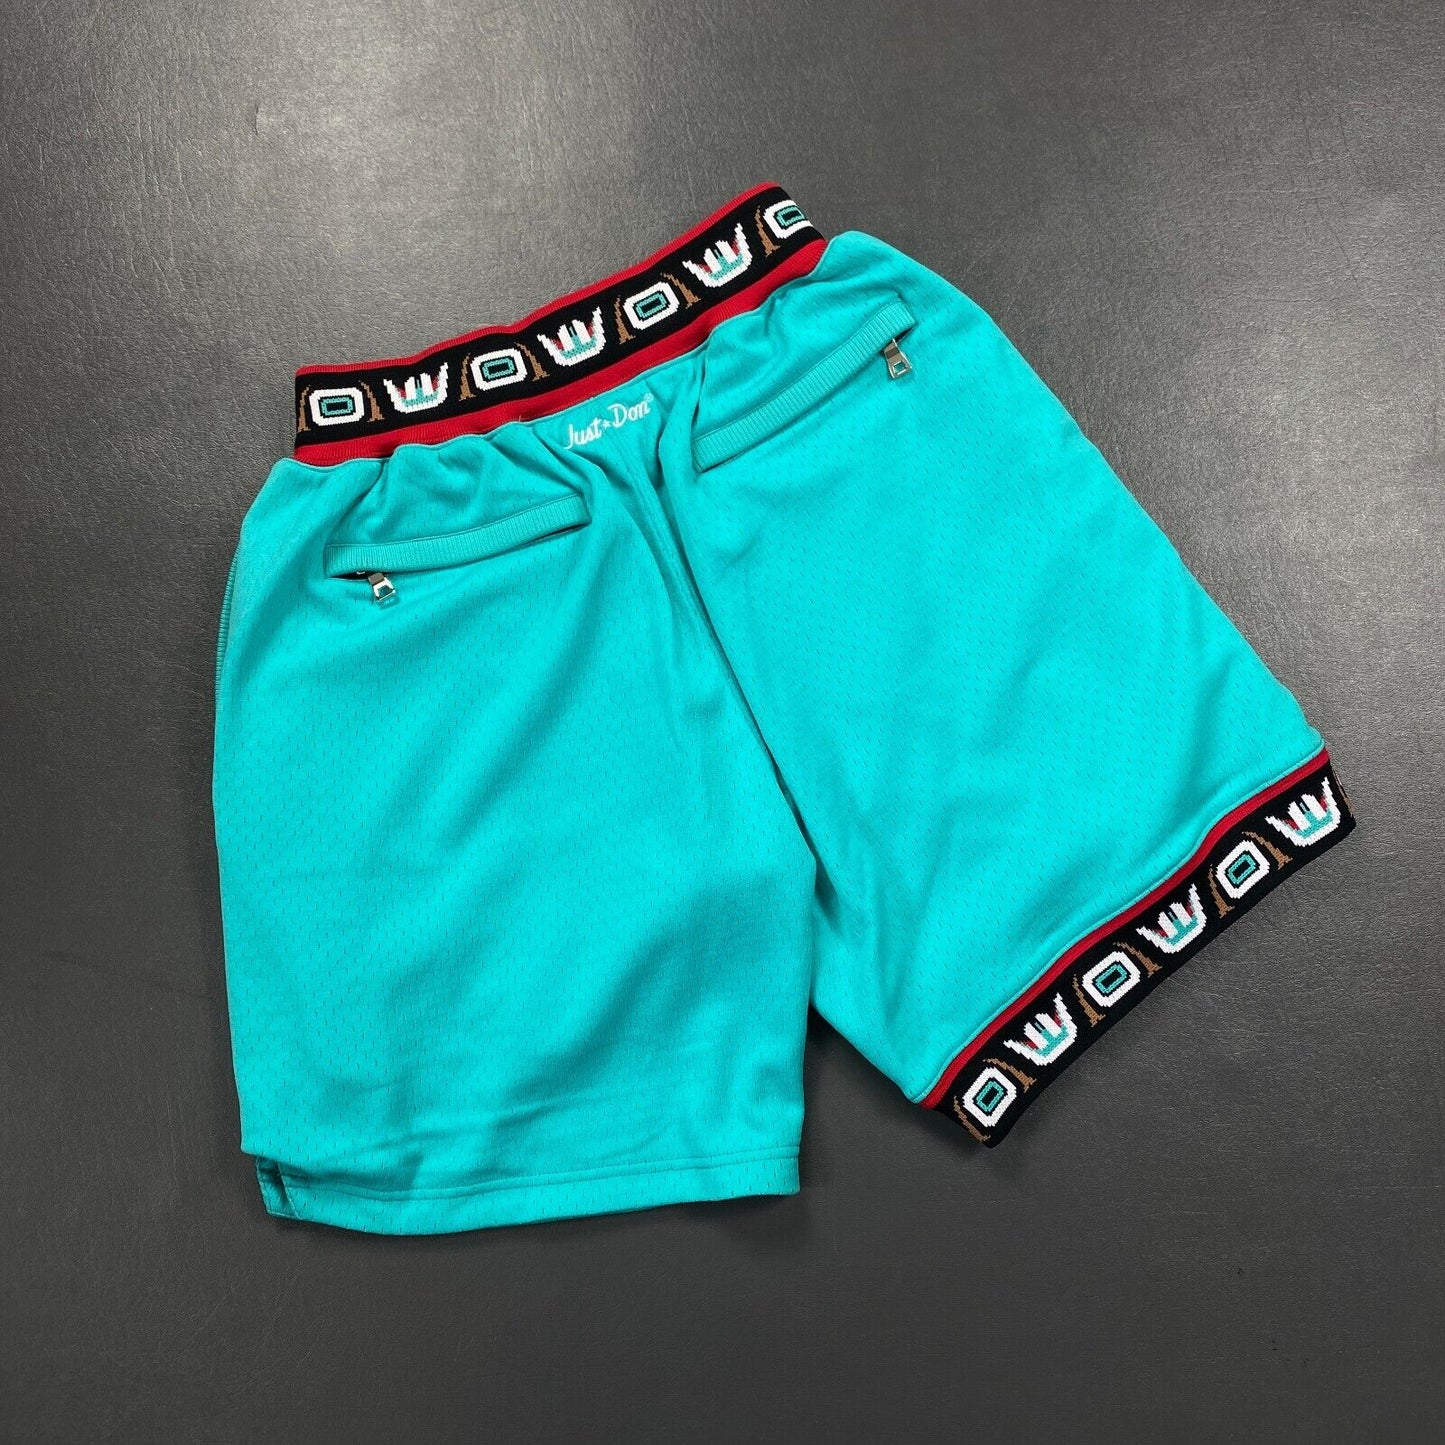 100% Authentic Just Don 95 96 Vancouver Grizzlies Mitchell Ness Shorts Size S